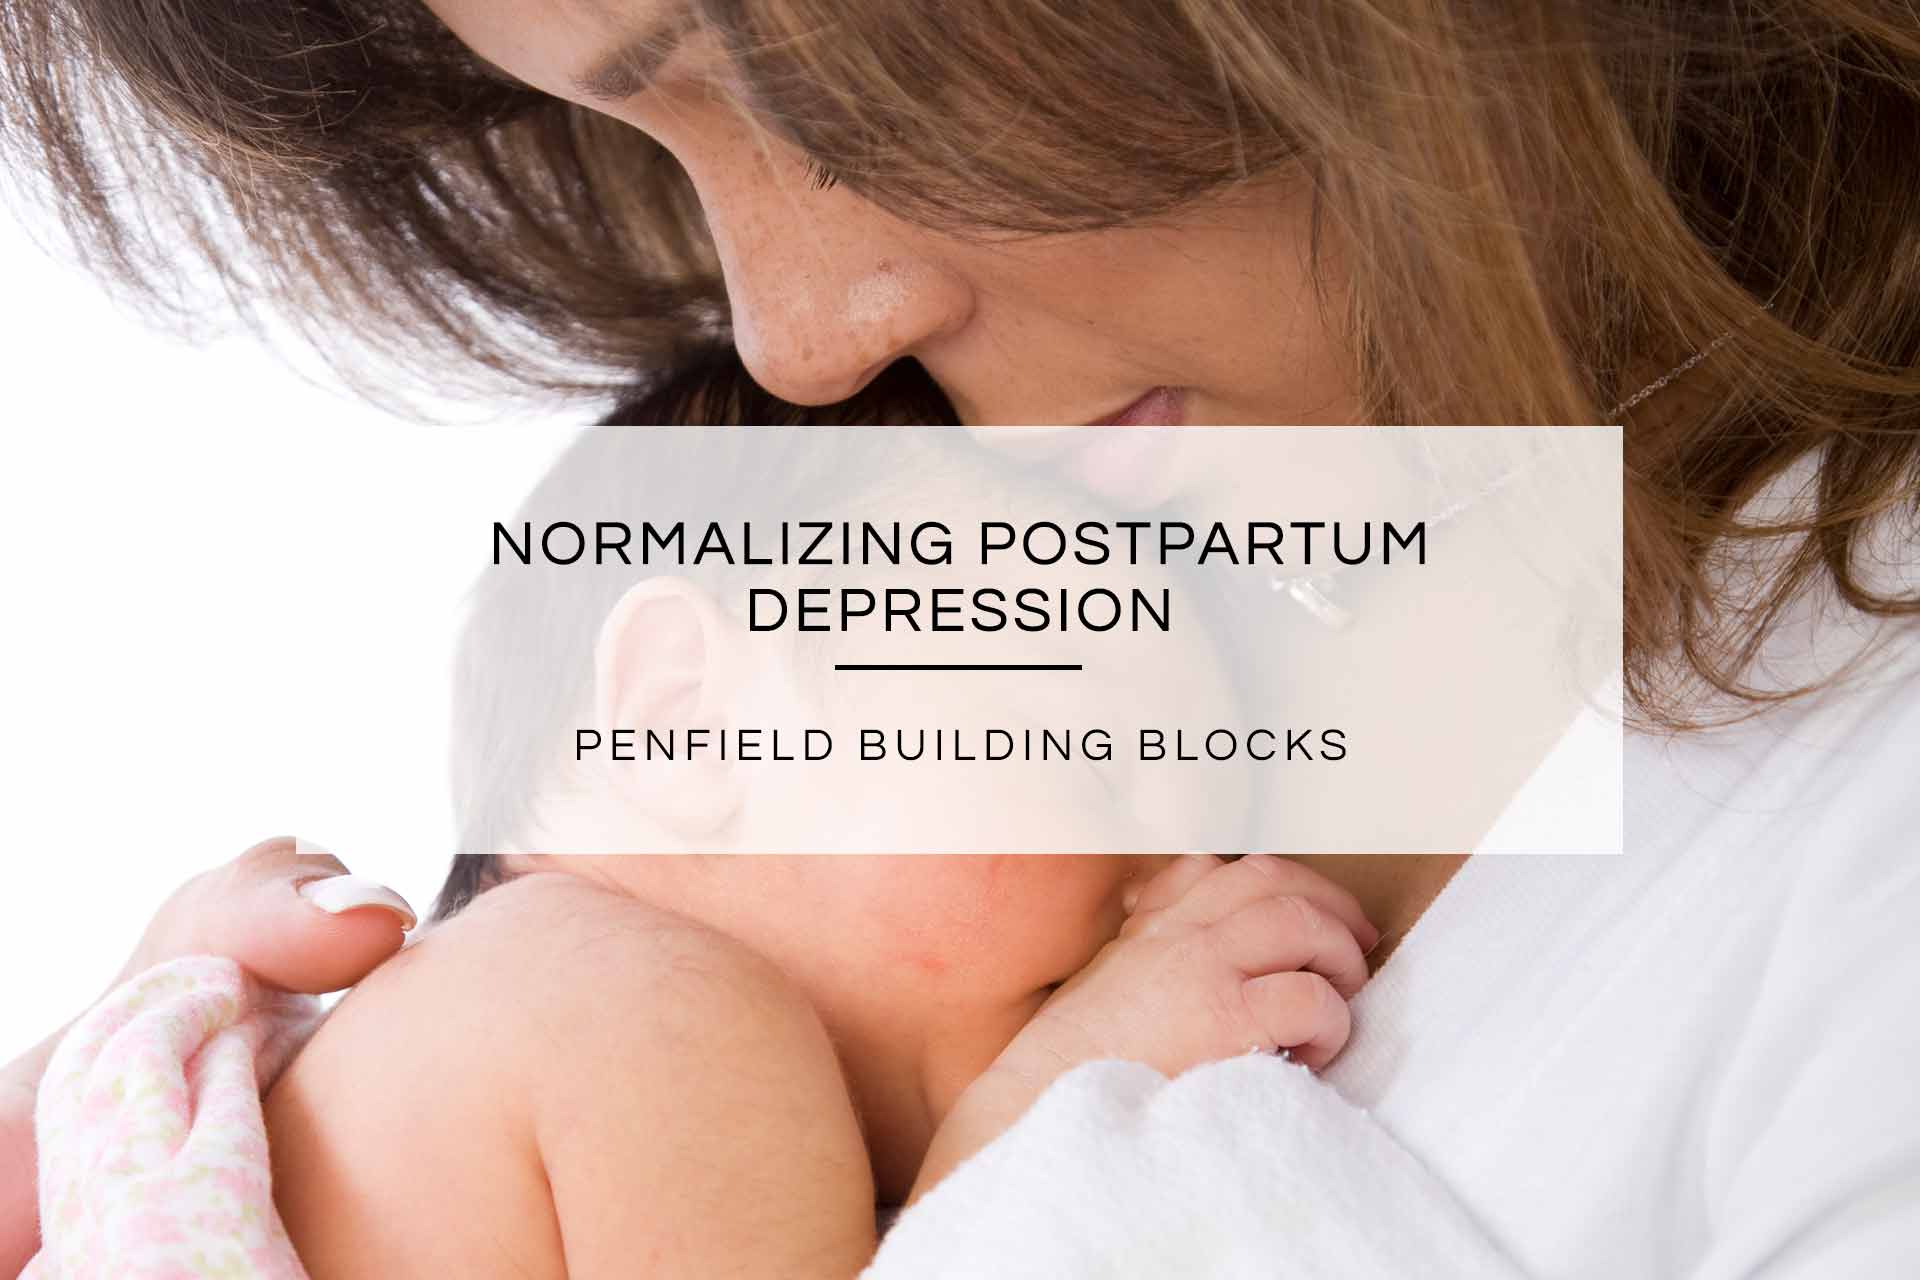 Normalizing Postpartum Depression and the Mental Health Challenges of Being a New Mom